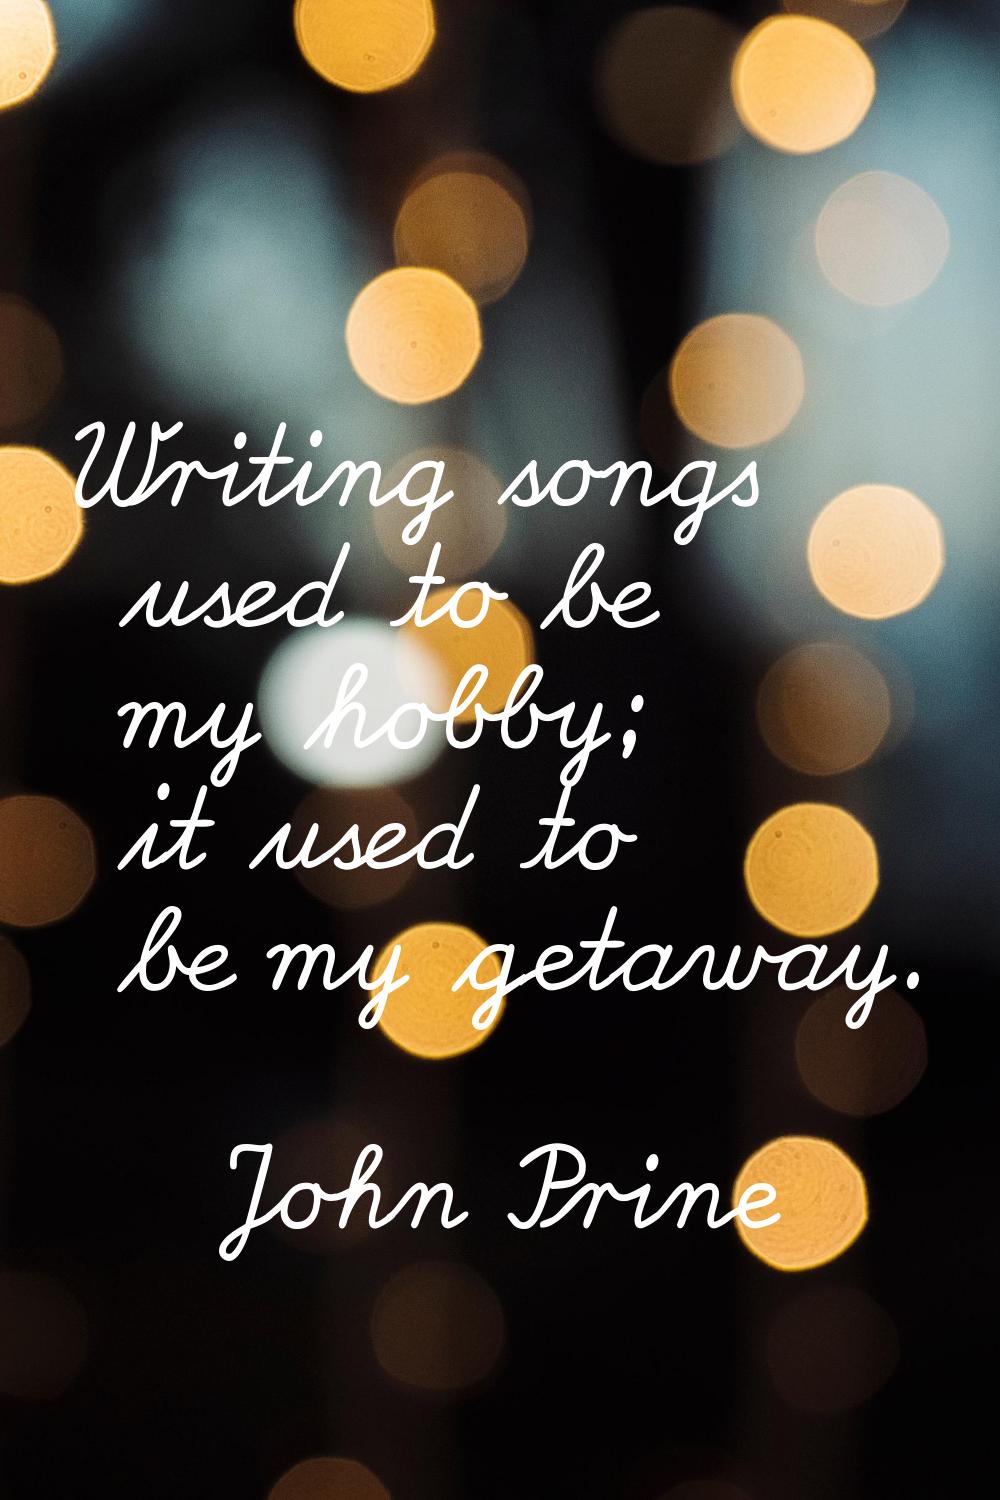 Writing songs used to be my hobby; it used to be my getaway.